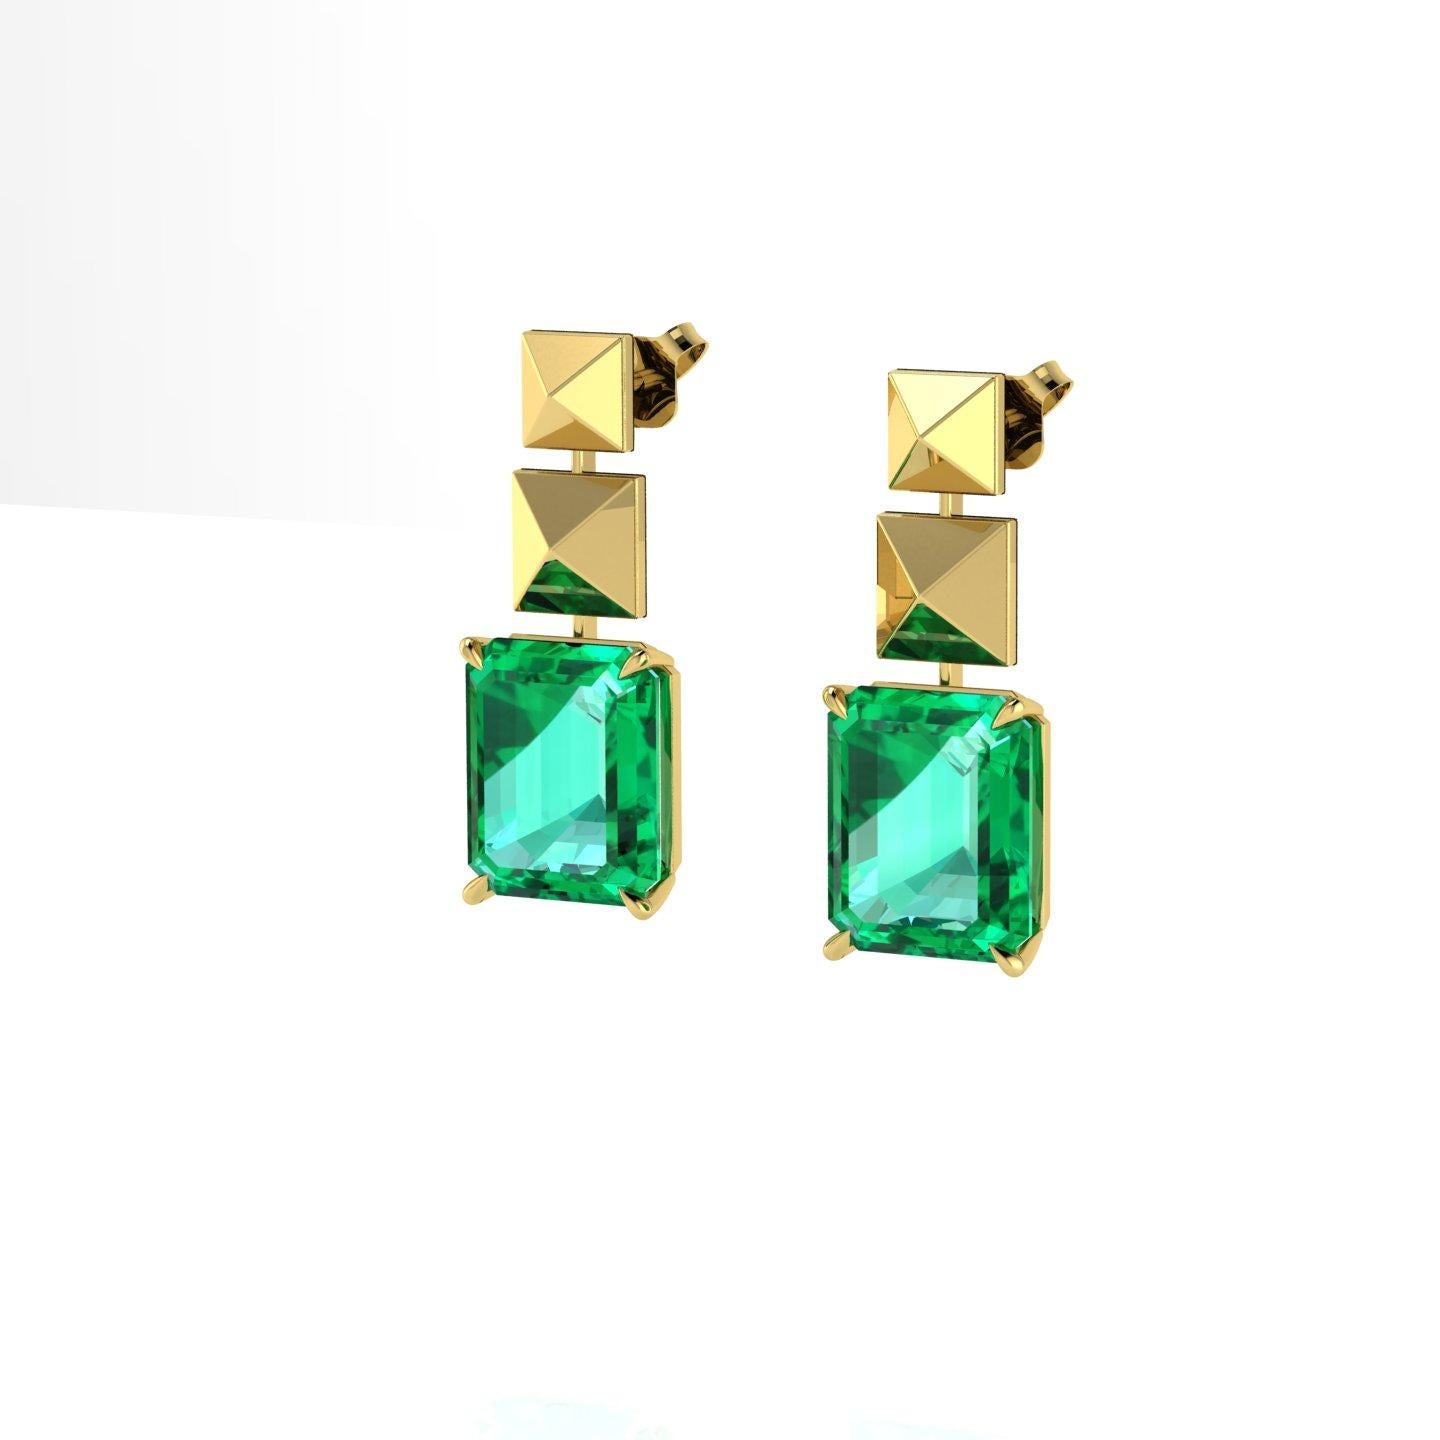 6.12 carats of Matching natural Emeralds from Colombia, GRS Certified (Gem Research Swisslab) one of the most recognized gemmological laboratories for color gemstones in the worlds, set in original Ferrucci Pyramid's design, conceived in 18k Yellow